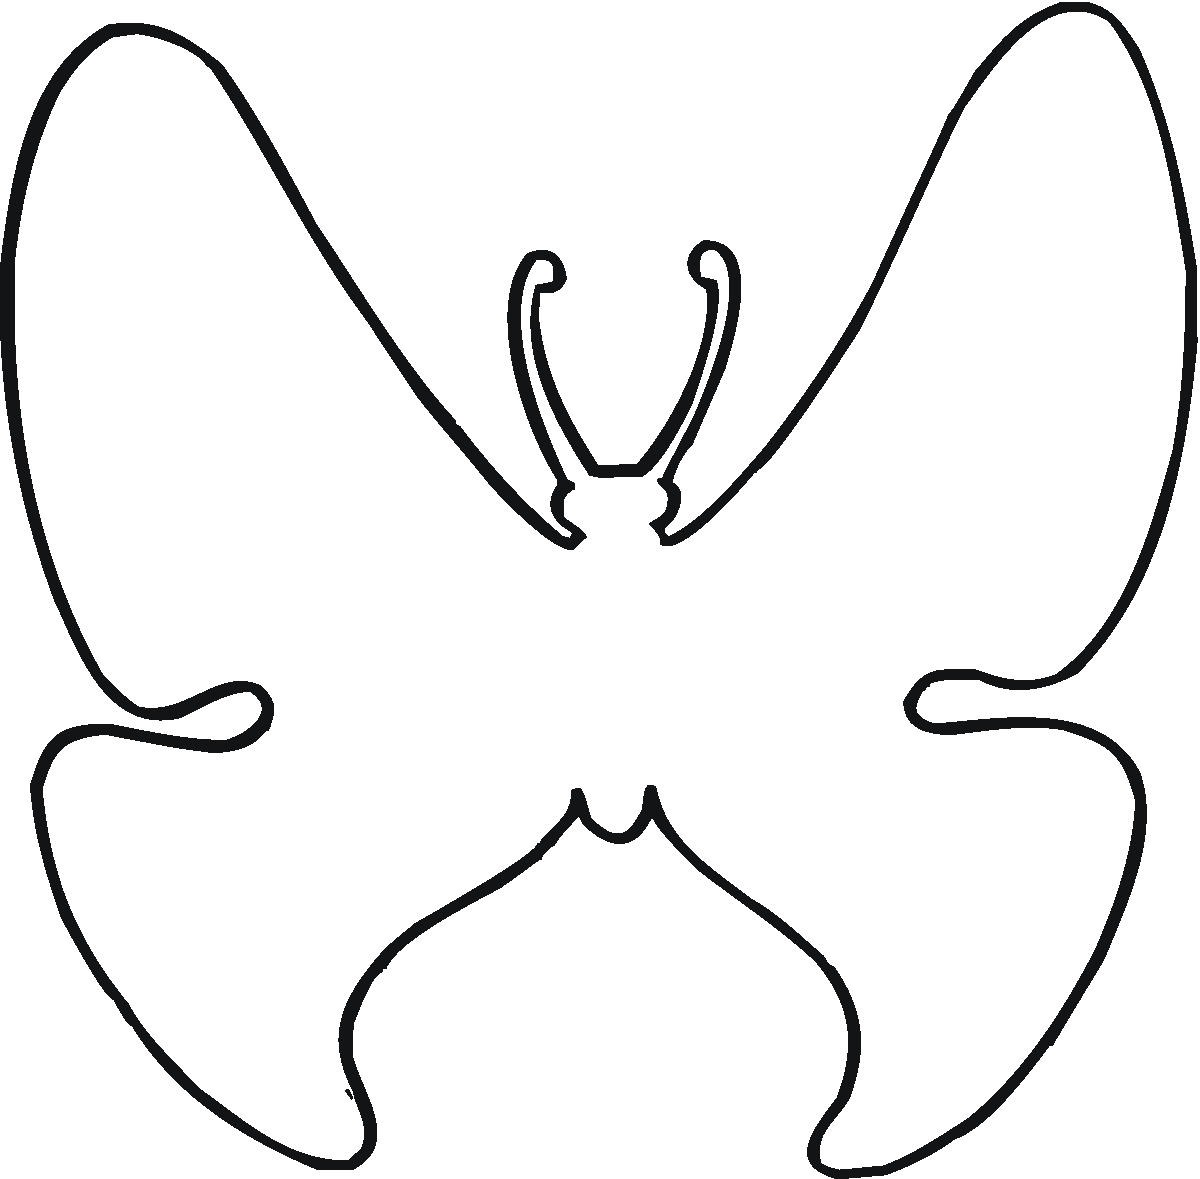 Butterfly Outline Coloring Page | Coloring Picture HD For Kids 